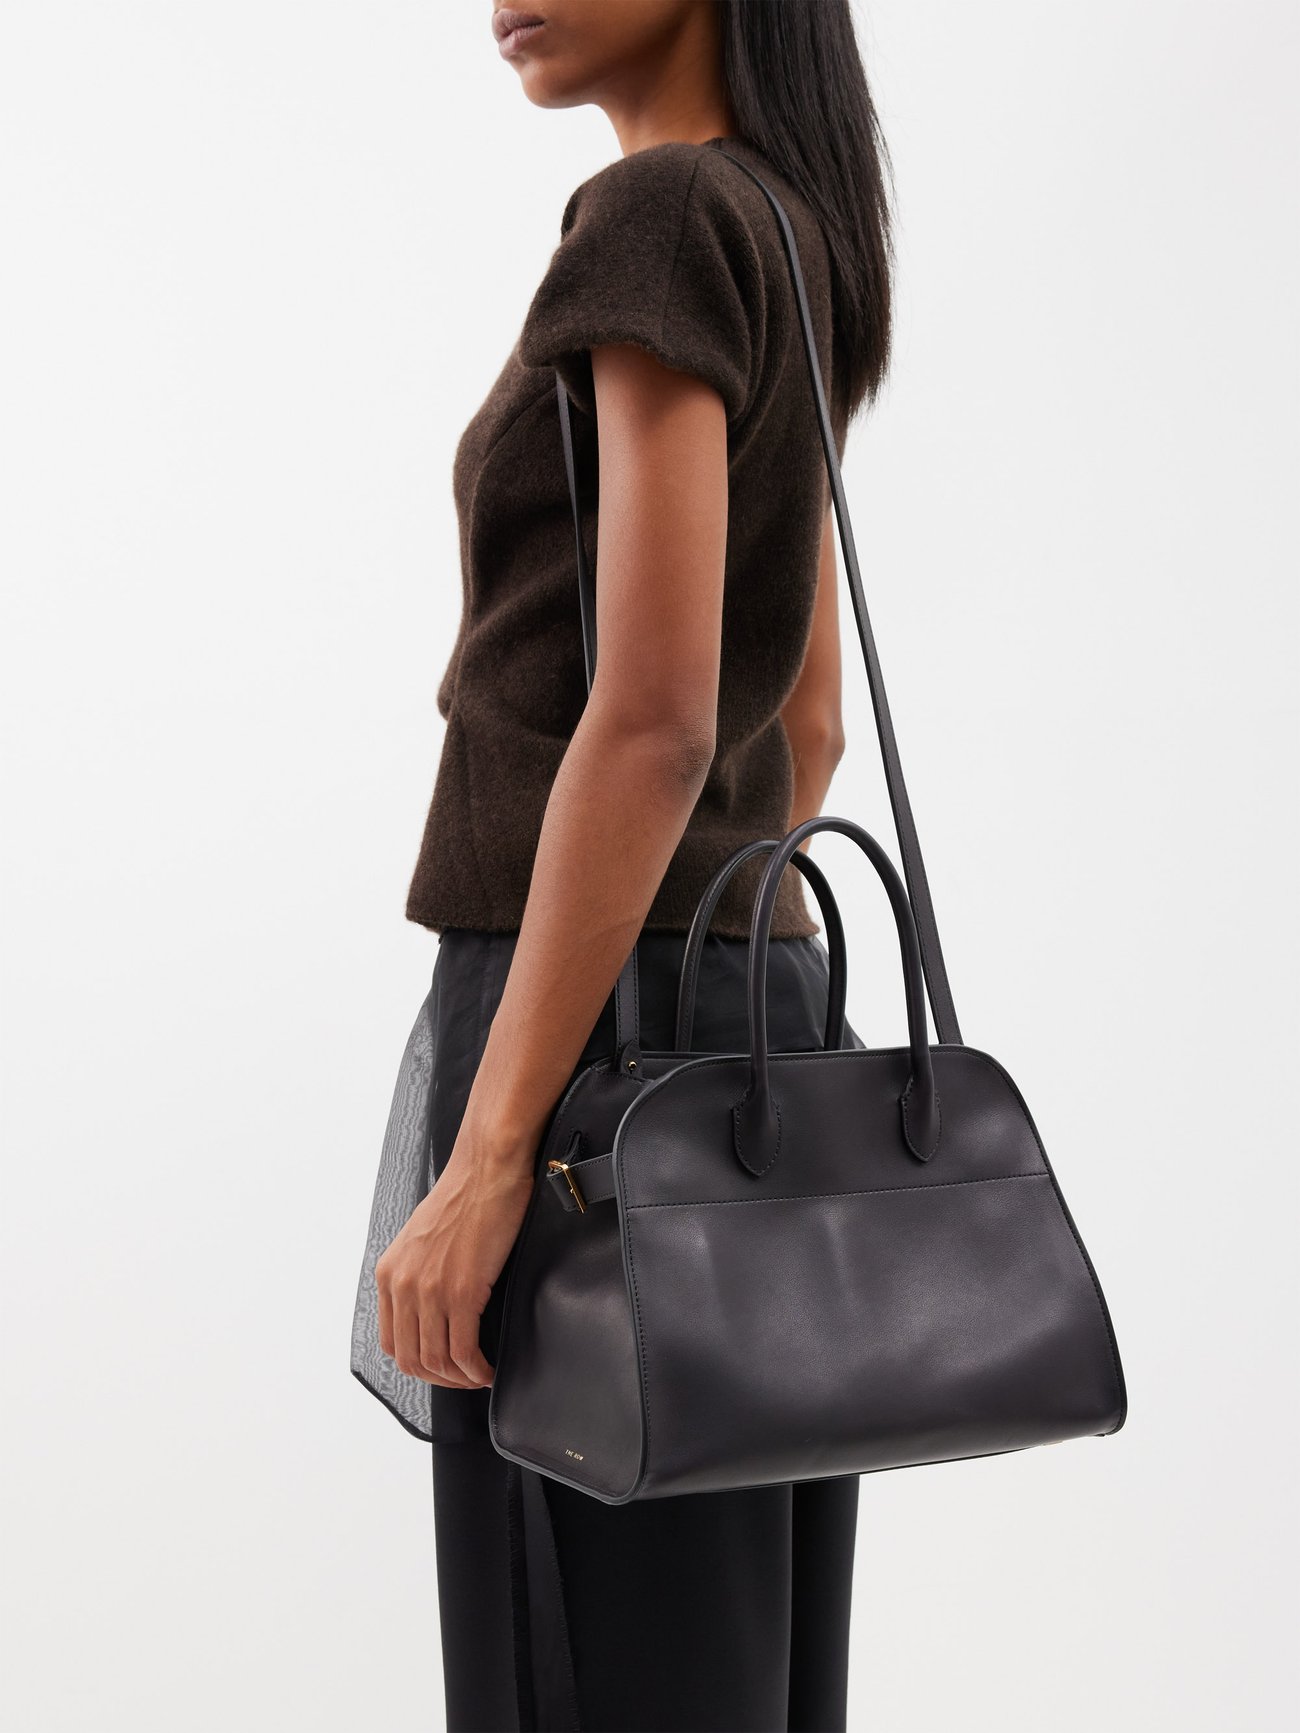 The Row, Soft Margaux 12 dark brown leather bag